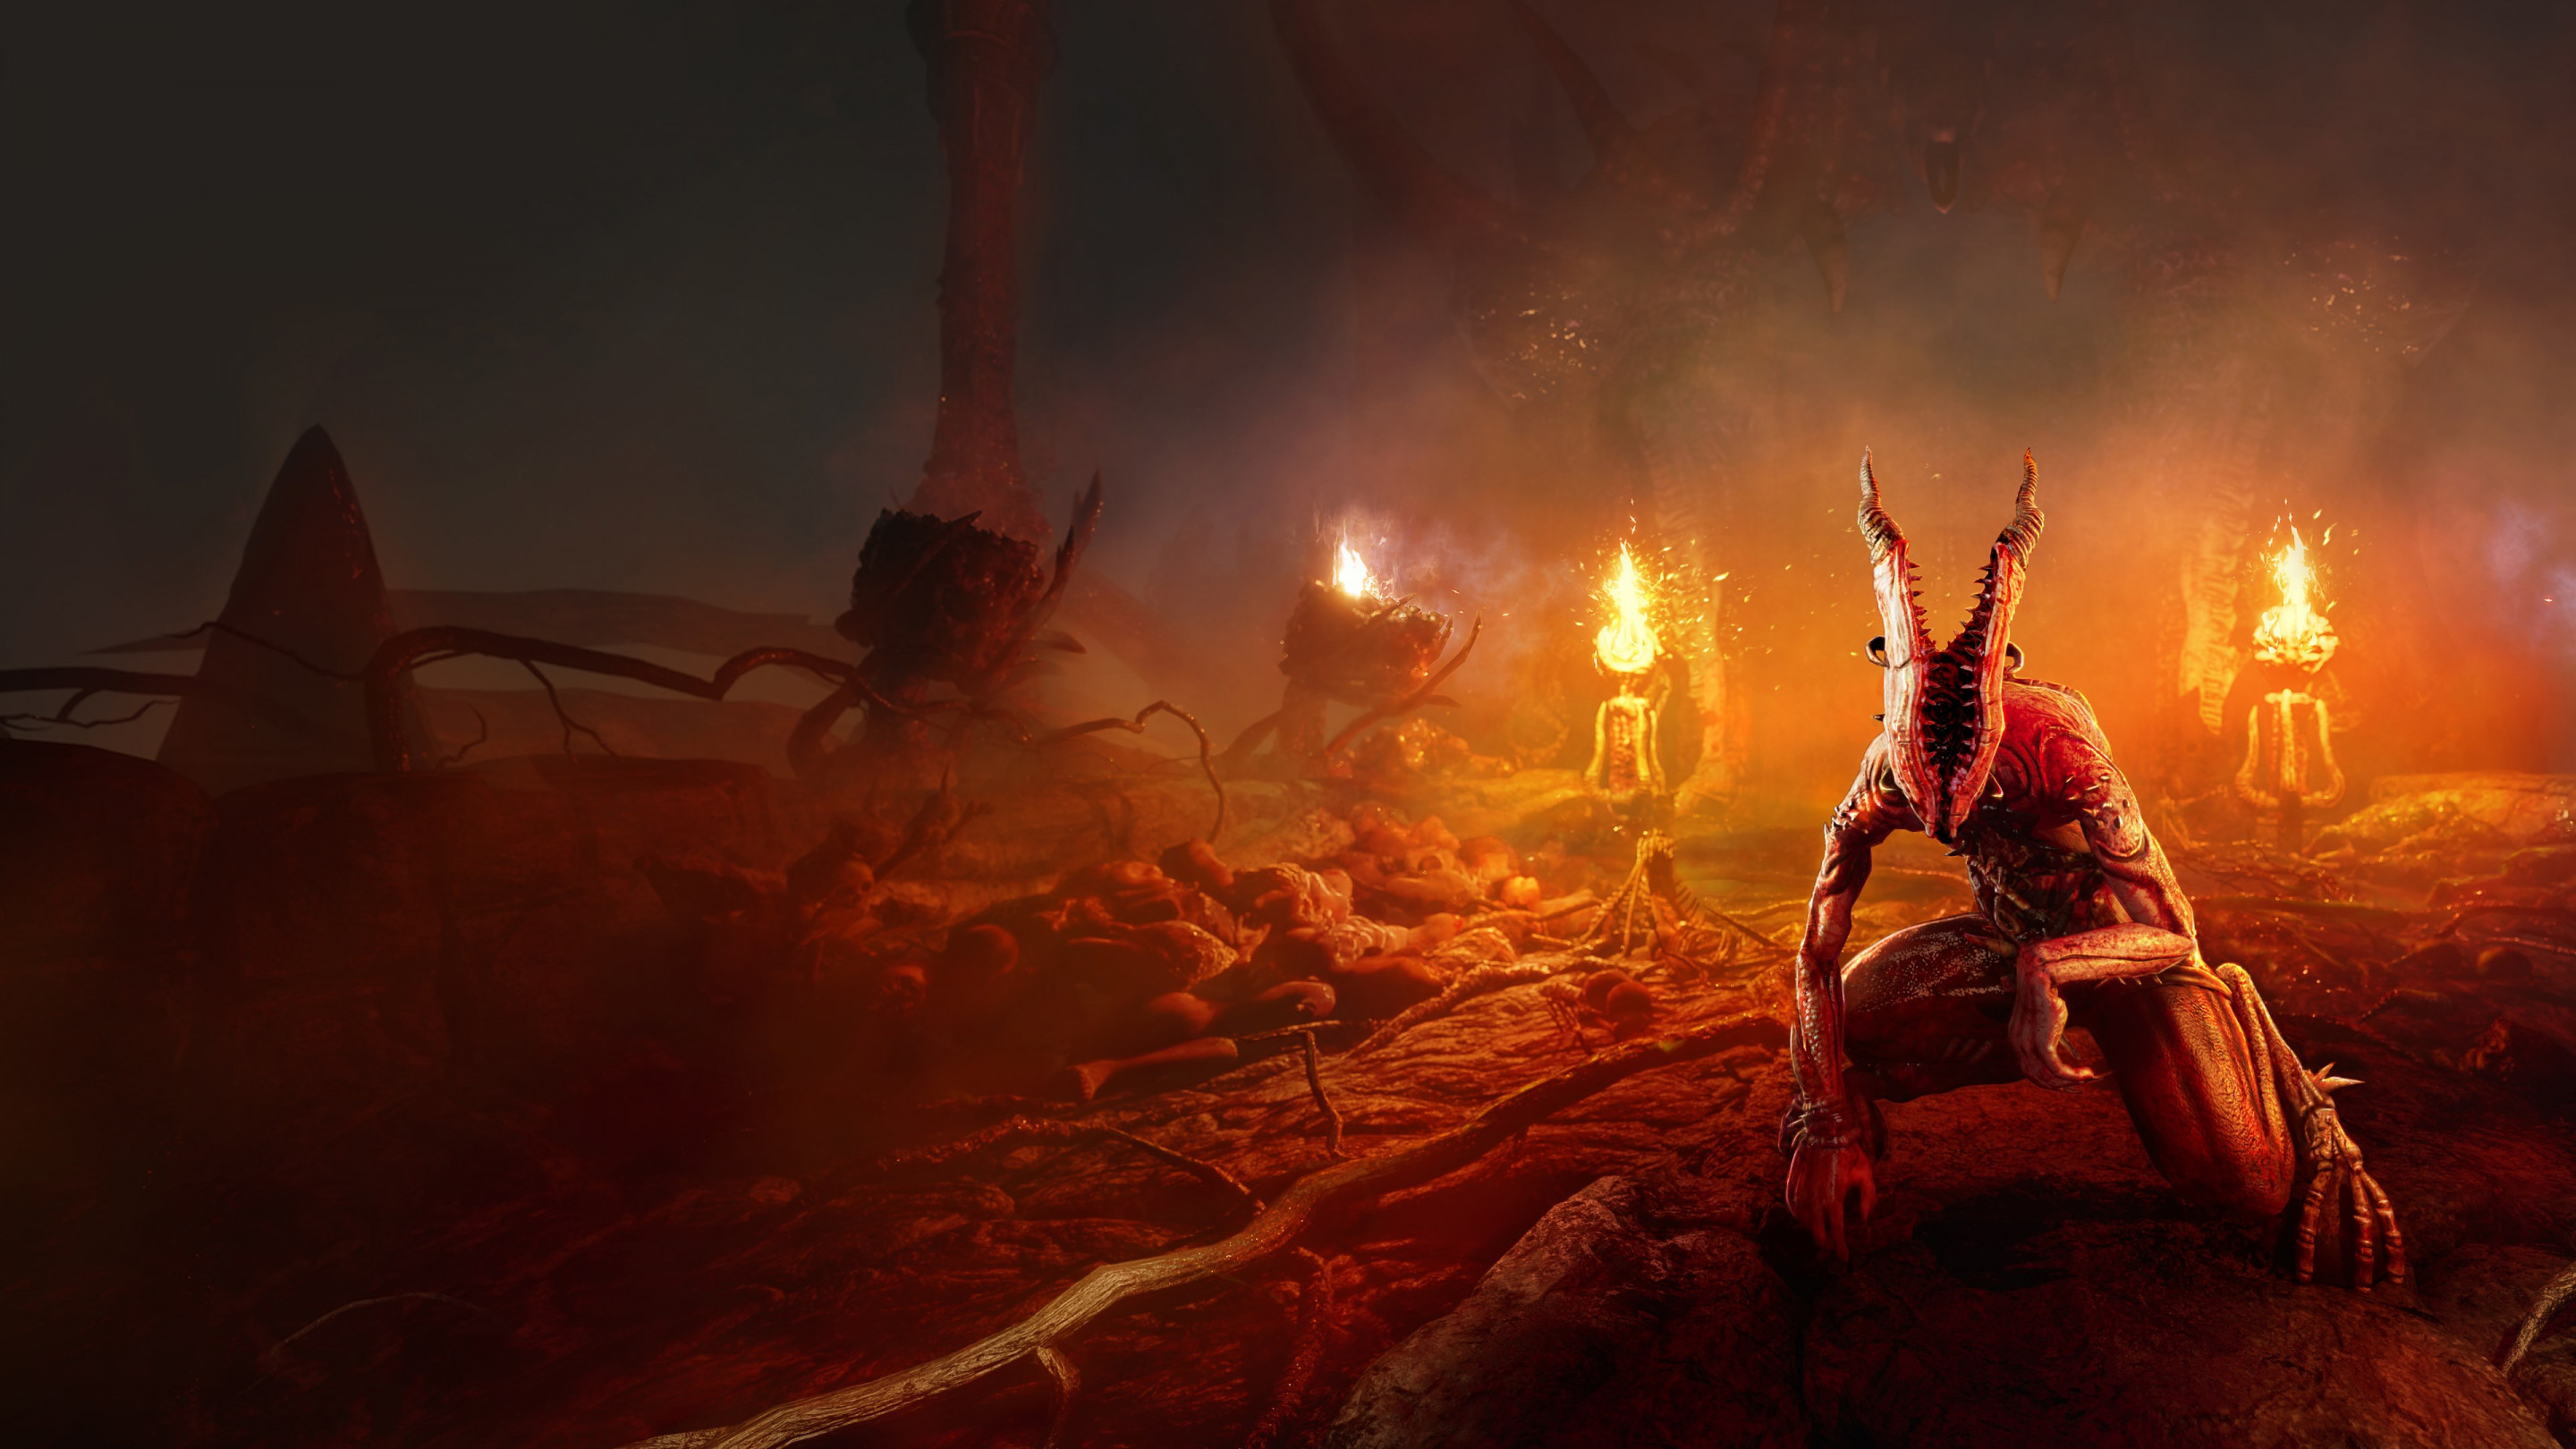 Agony, the video game wallpaper 2880x1620